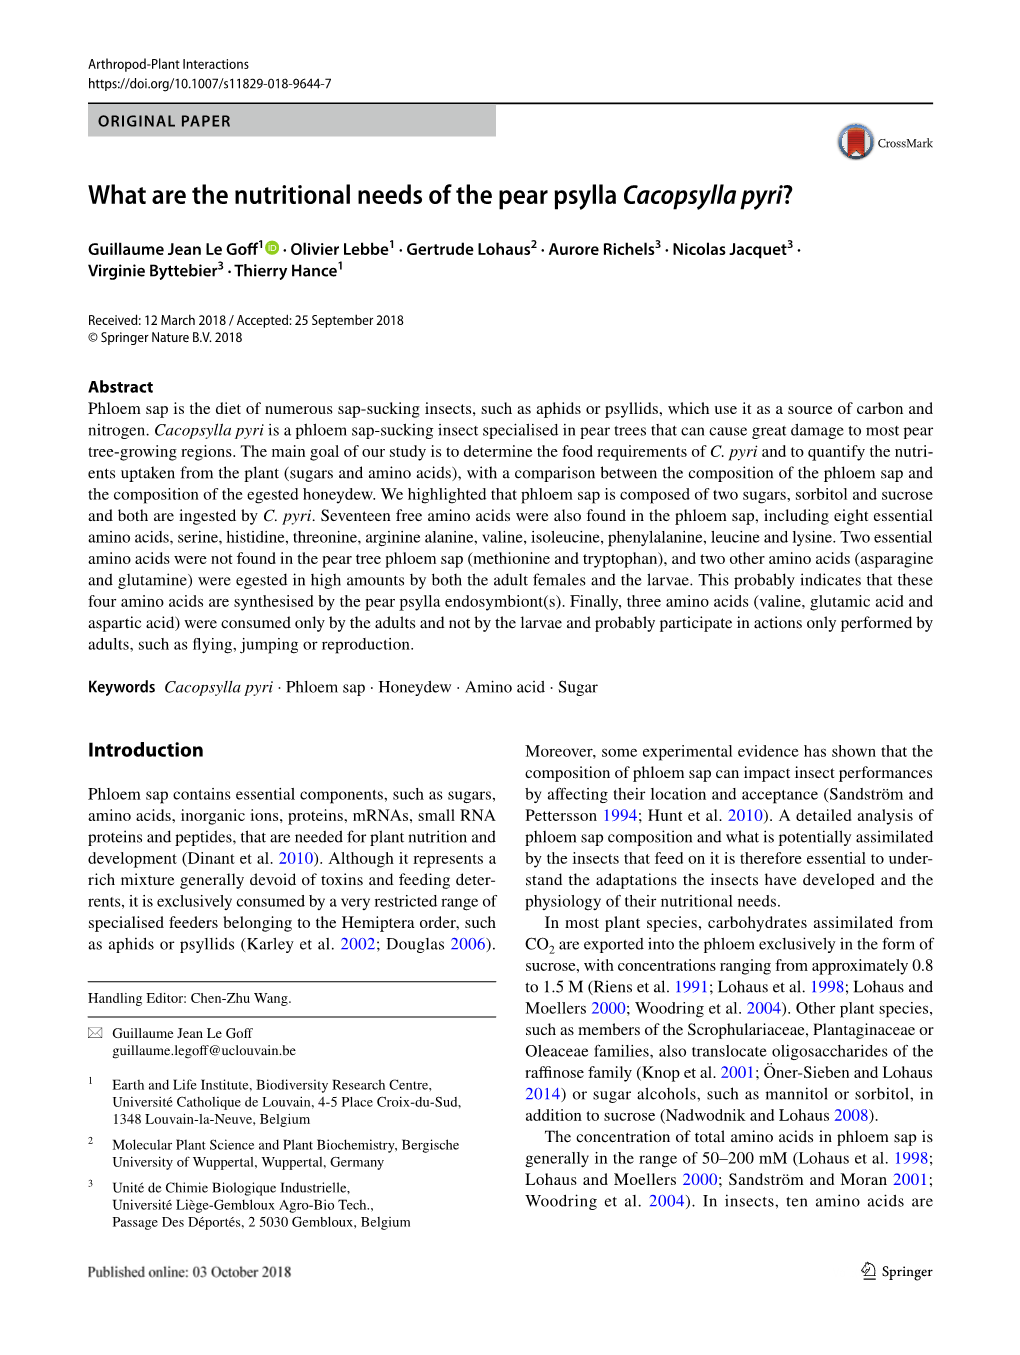 What Are the Nutritional Needs of the Pear Psylla Cacopsylla Pyri?